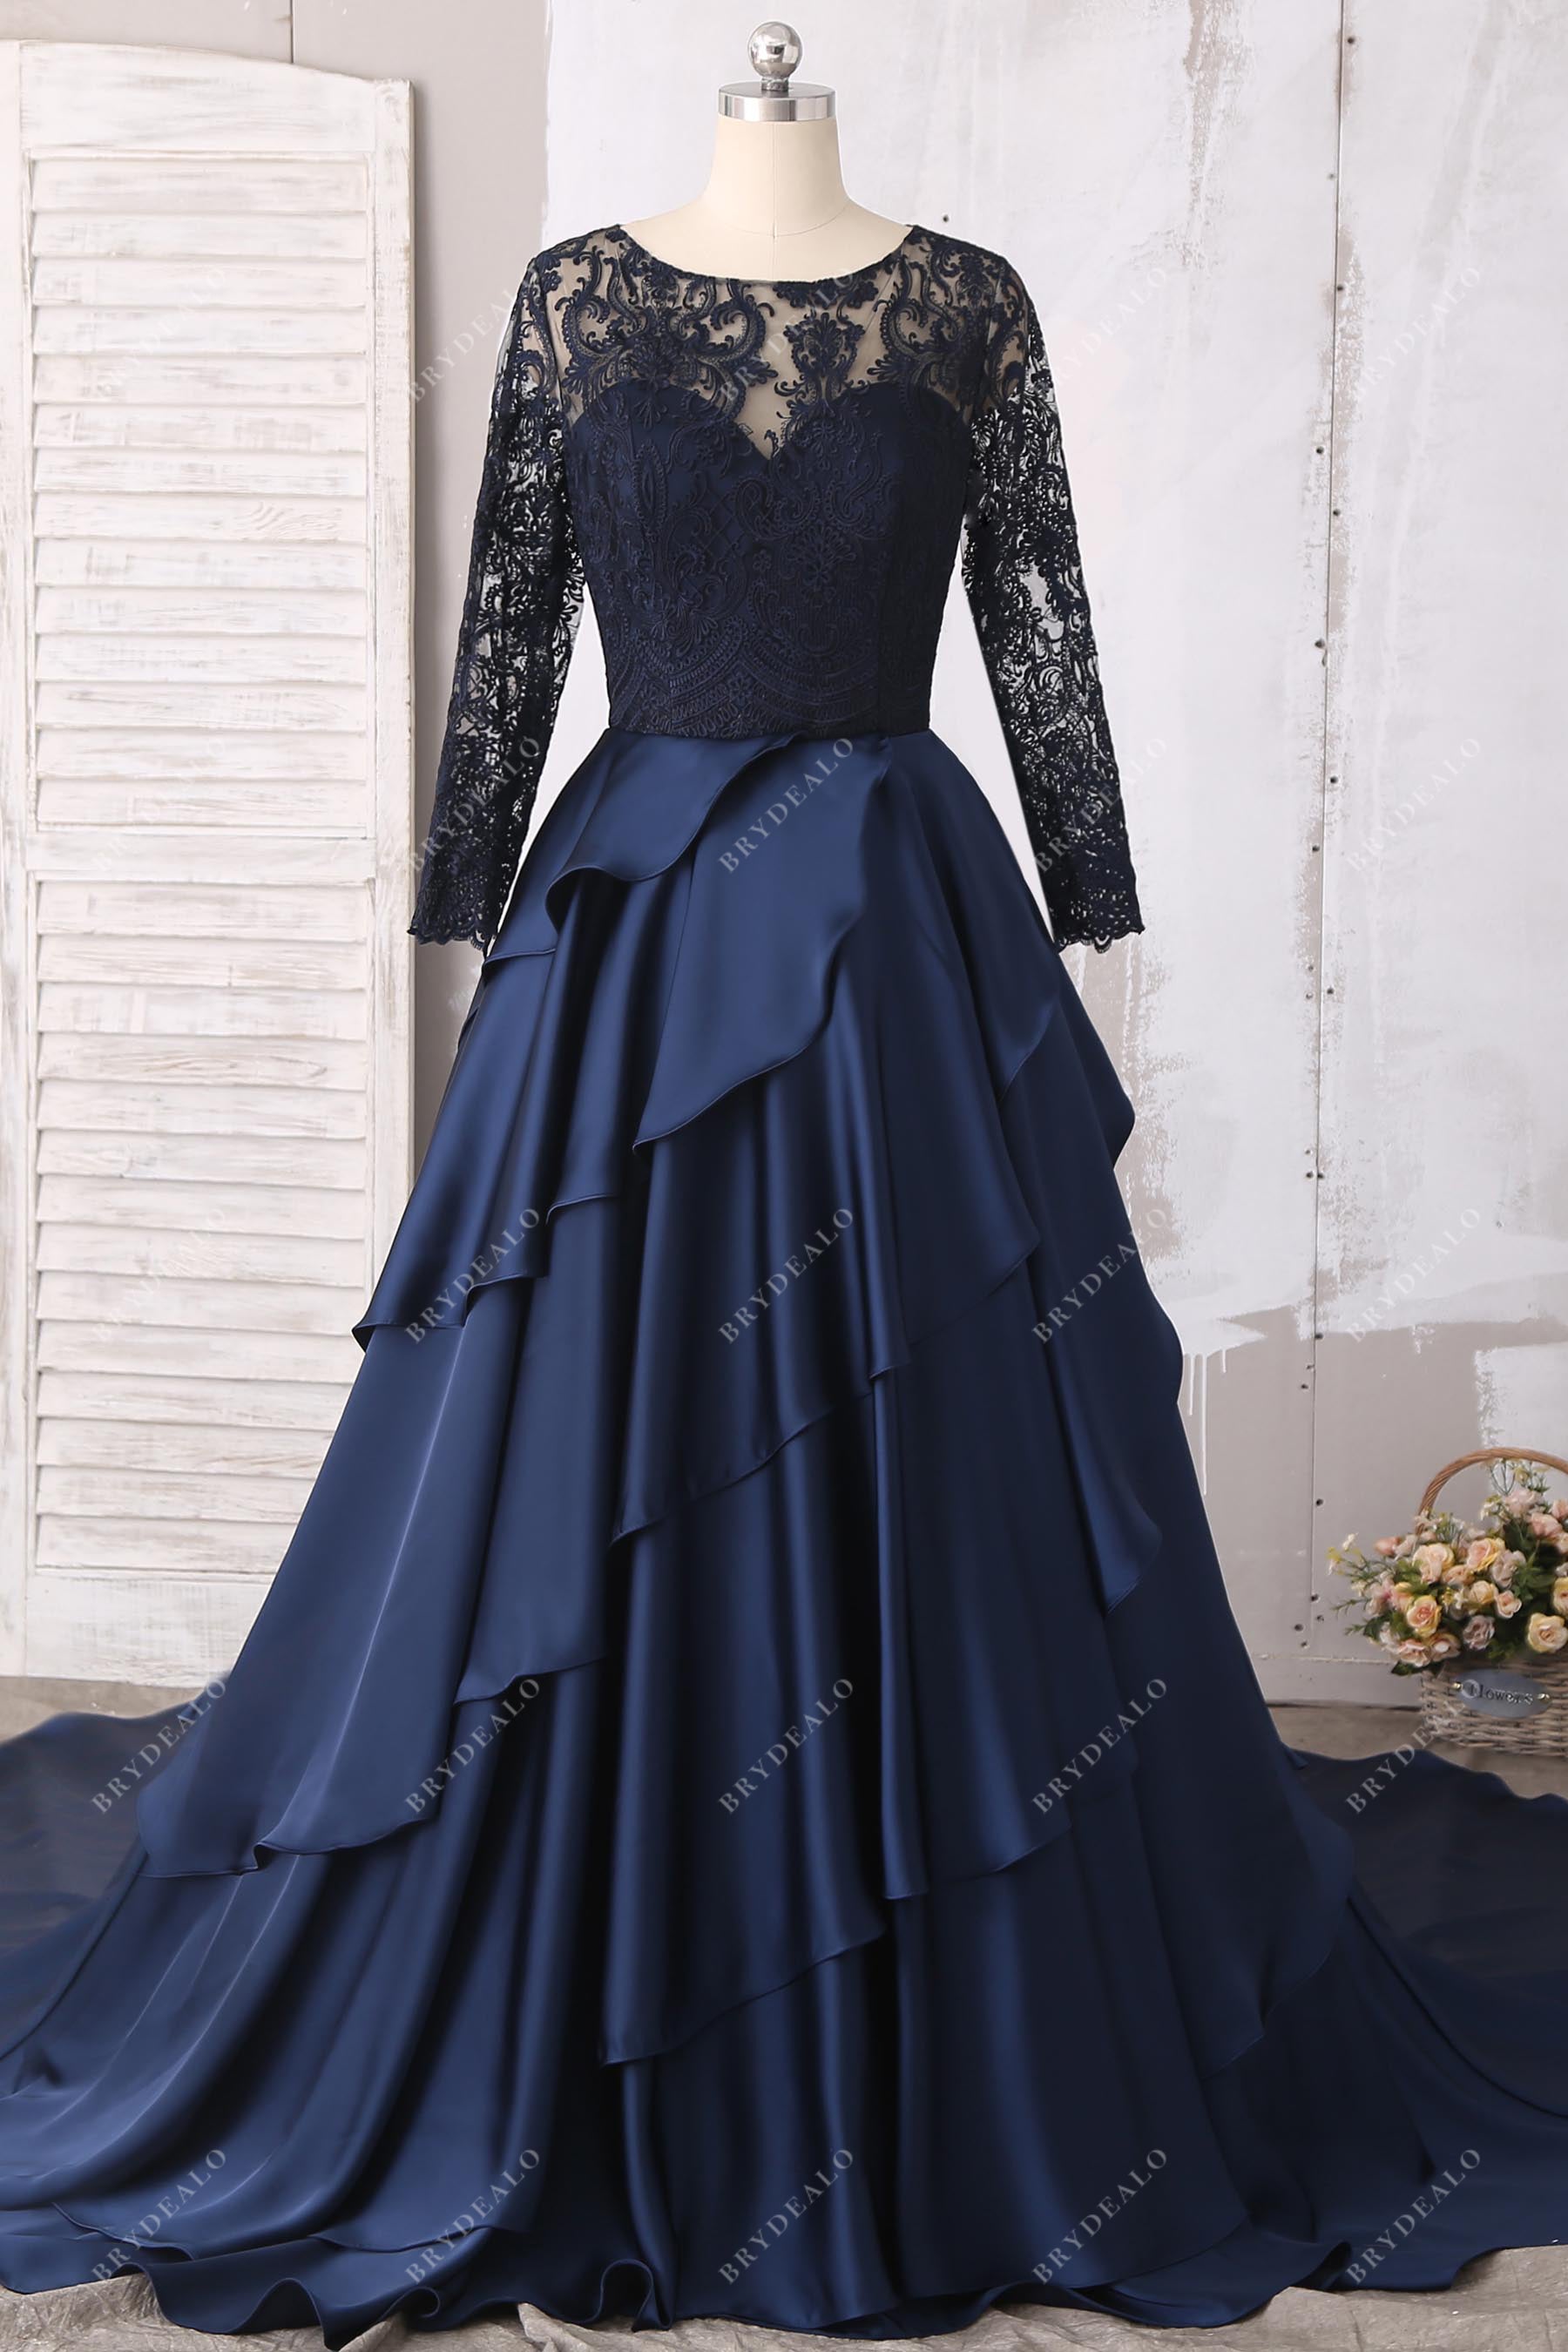 navy beaded lace boat neck long sleeves ruffled satin ball gown wedding dress